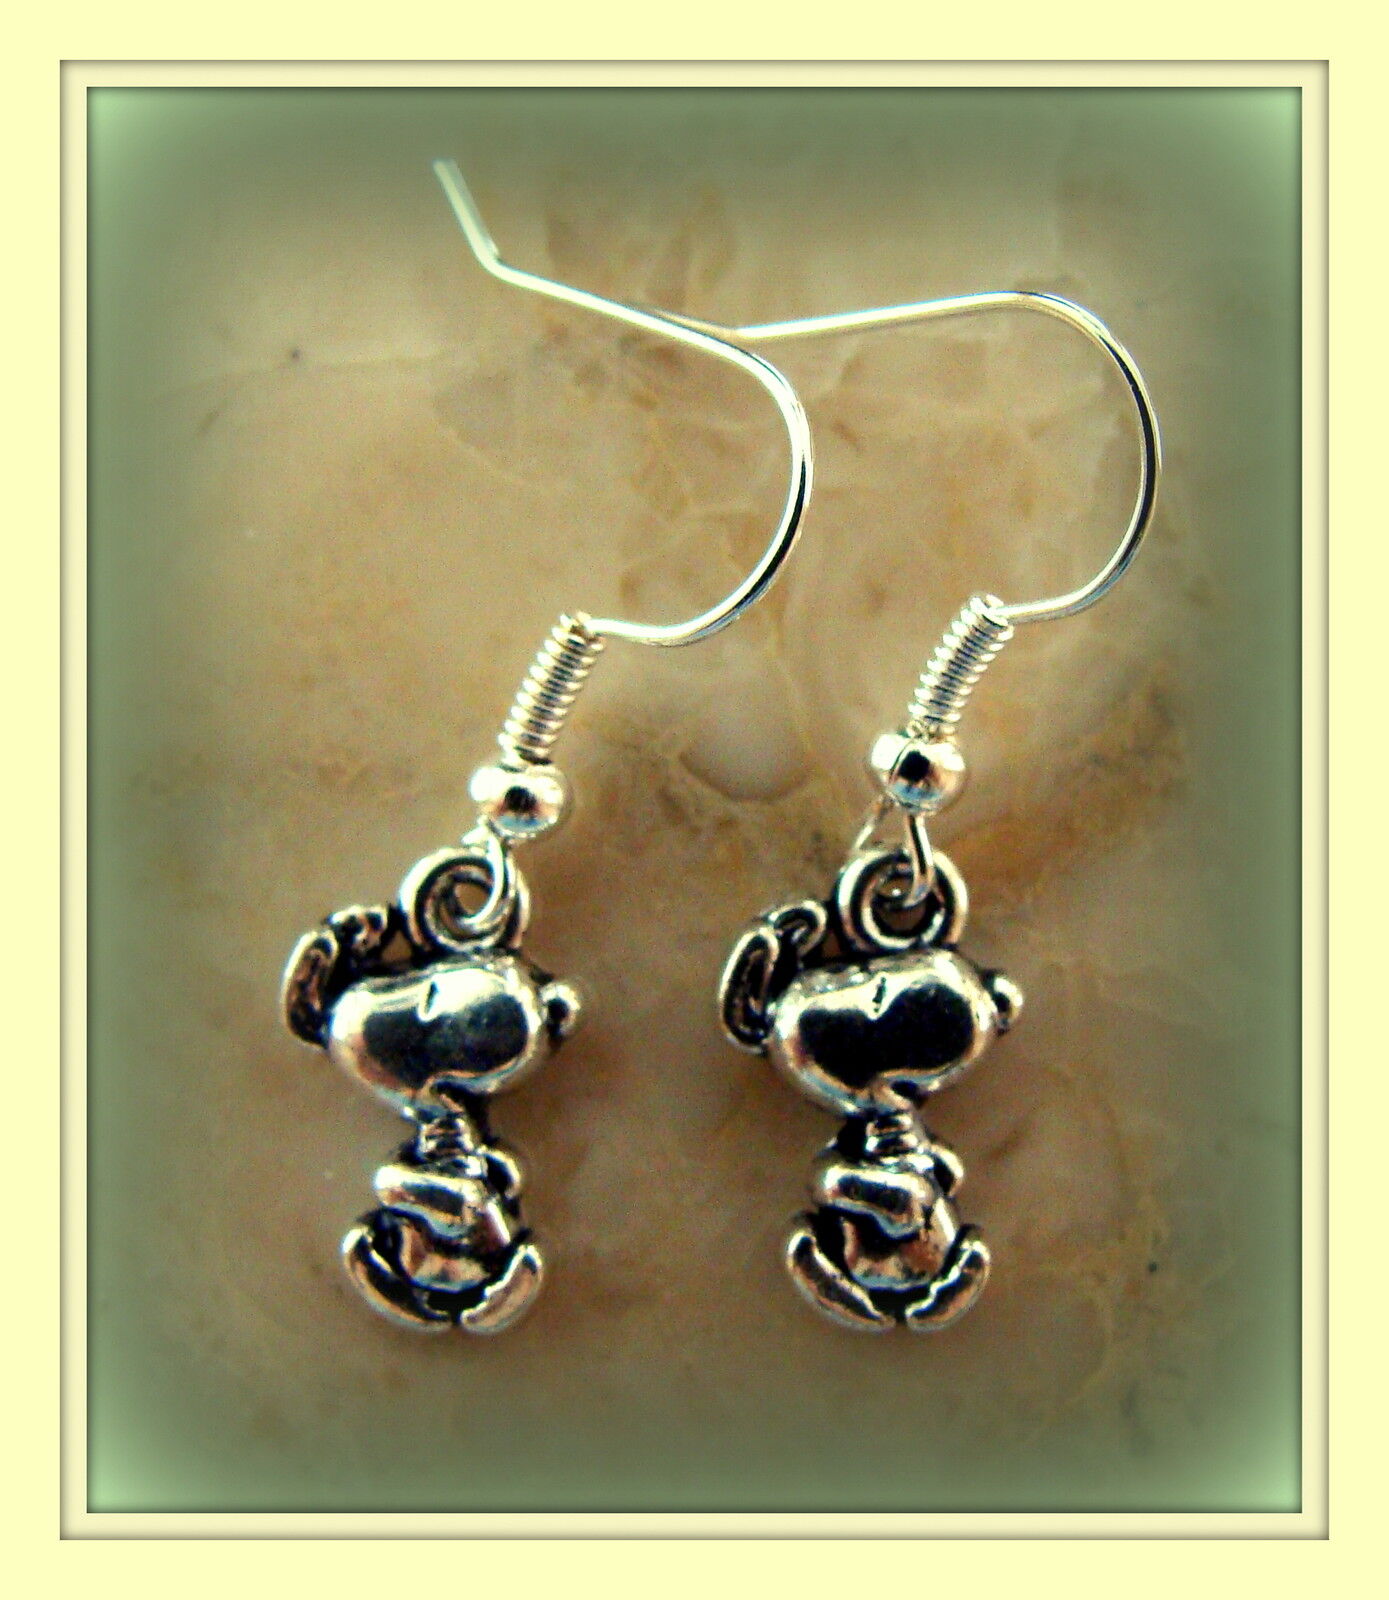 Unique Dancing SNOOPY EARRINGS Peanut\'s Jewelry - Charlie Brown\'s Dog SNOOPY